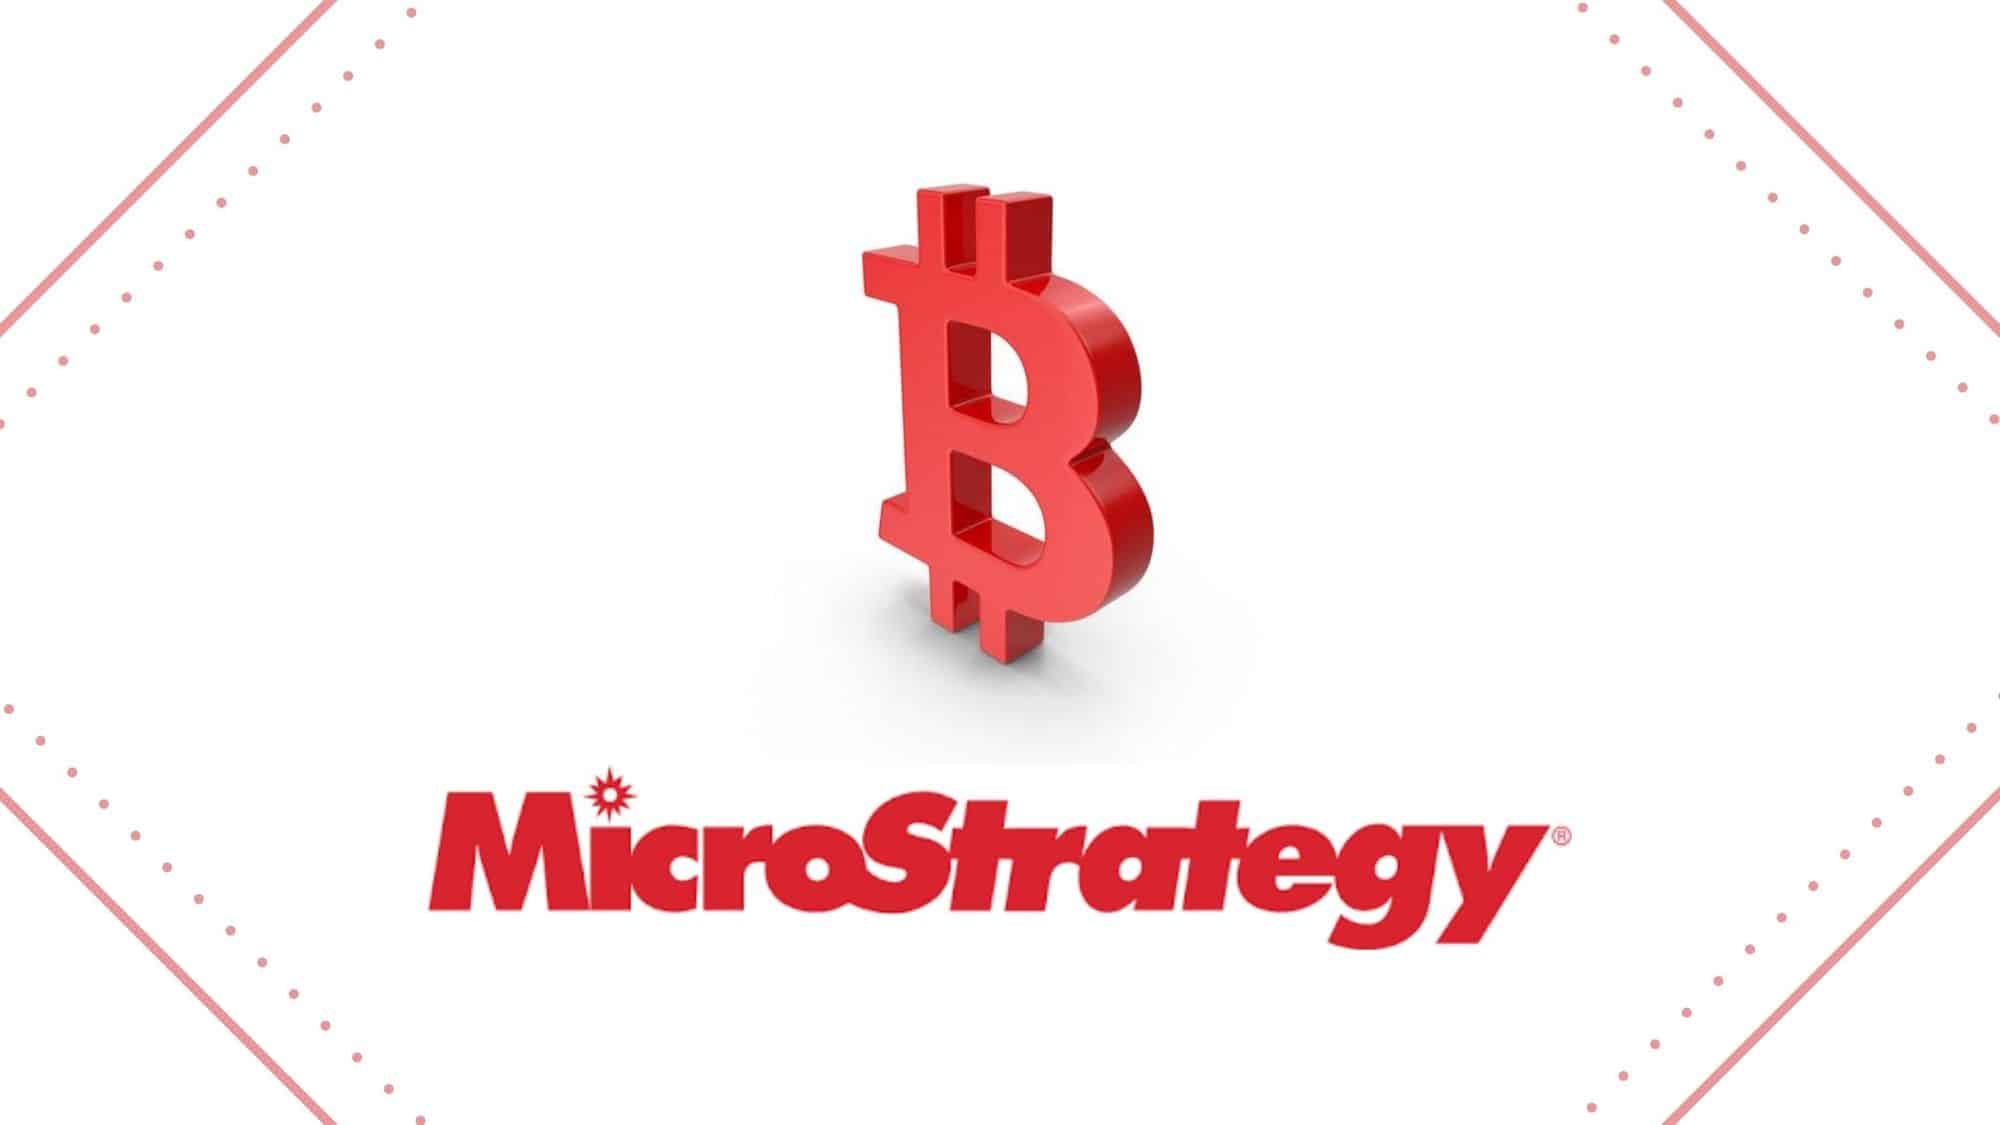 MicroStrategy adds 660 more Bitcoins to their treasury: holds 125,051 BTC in total